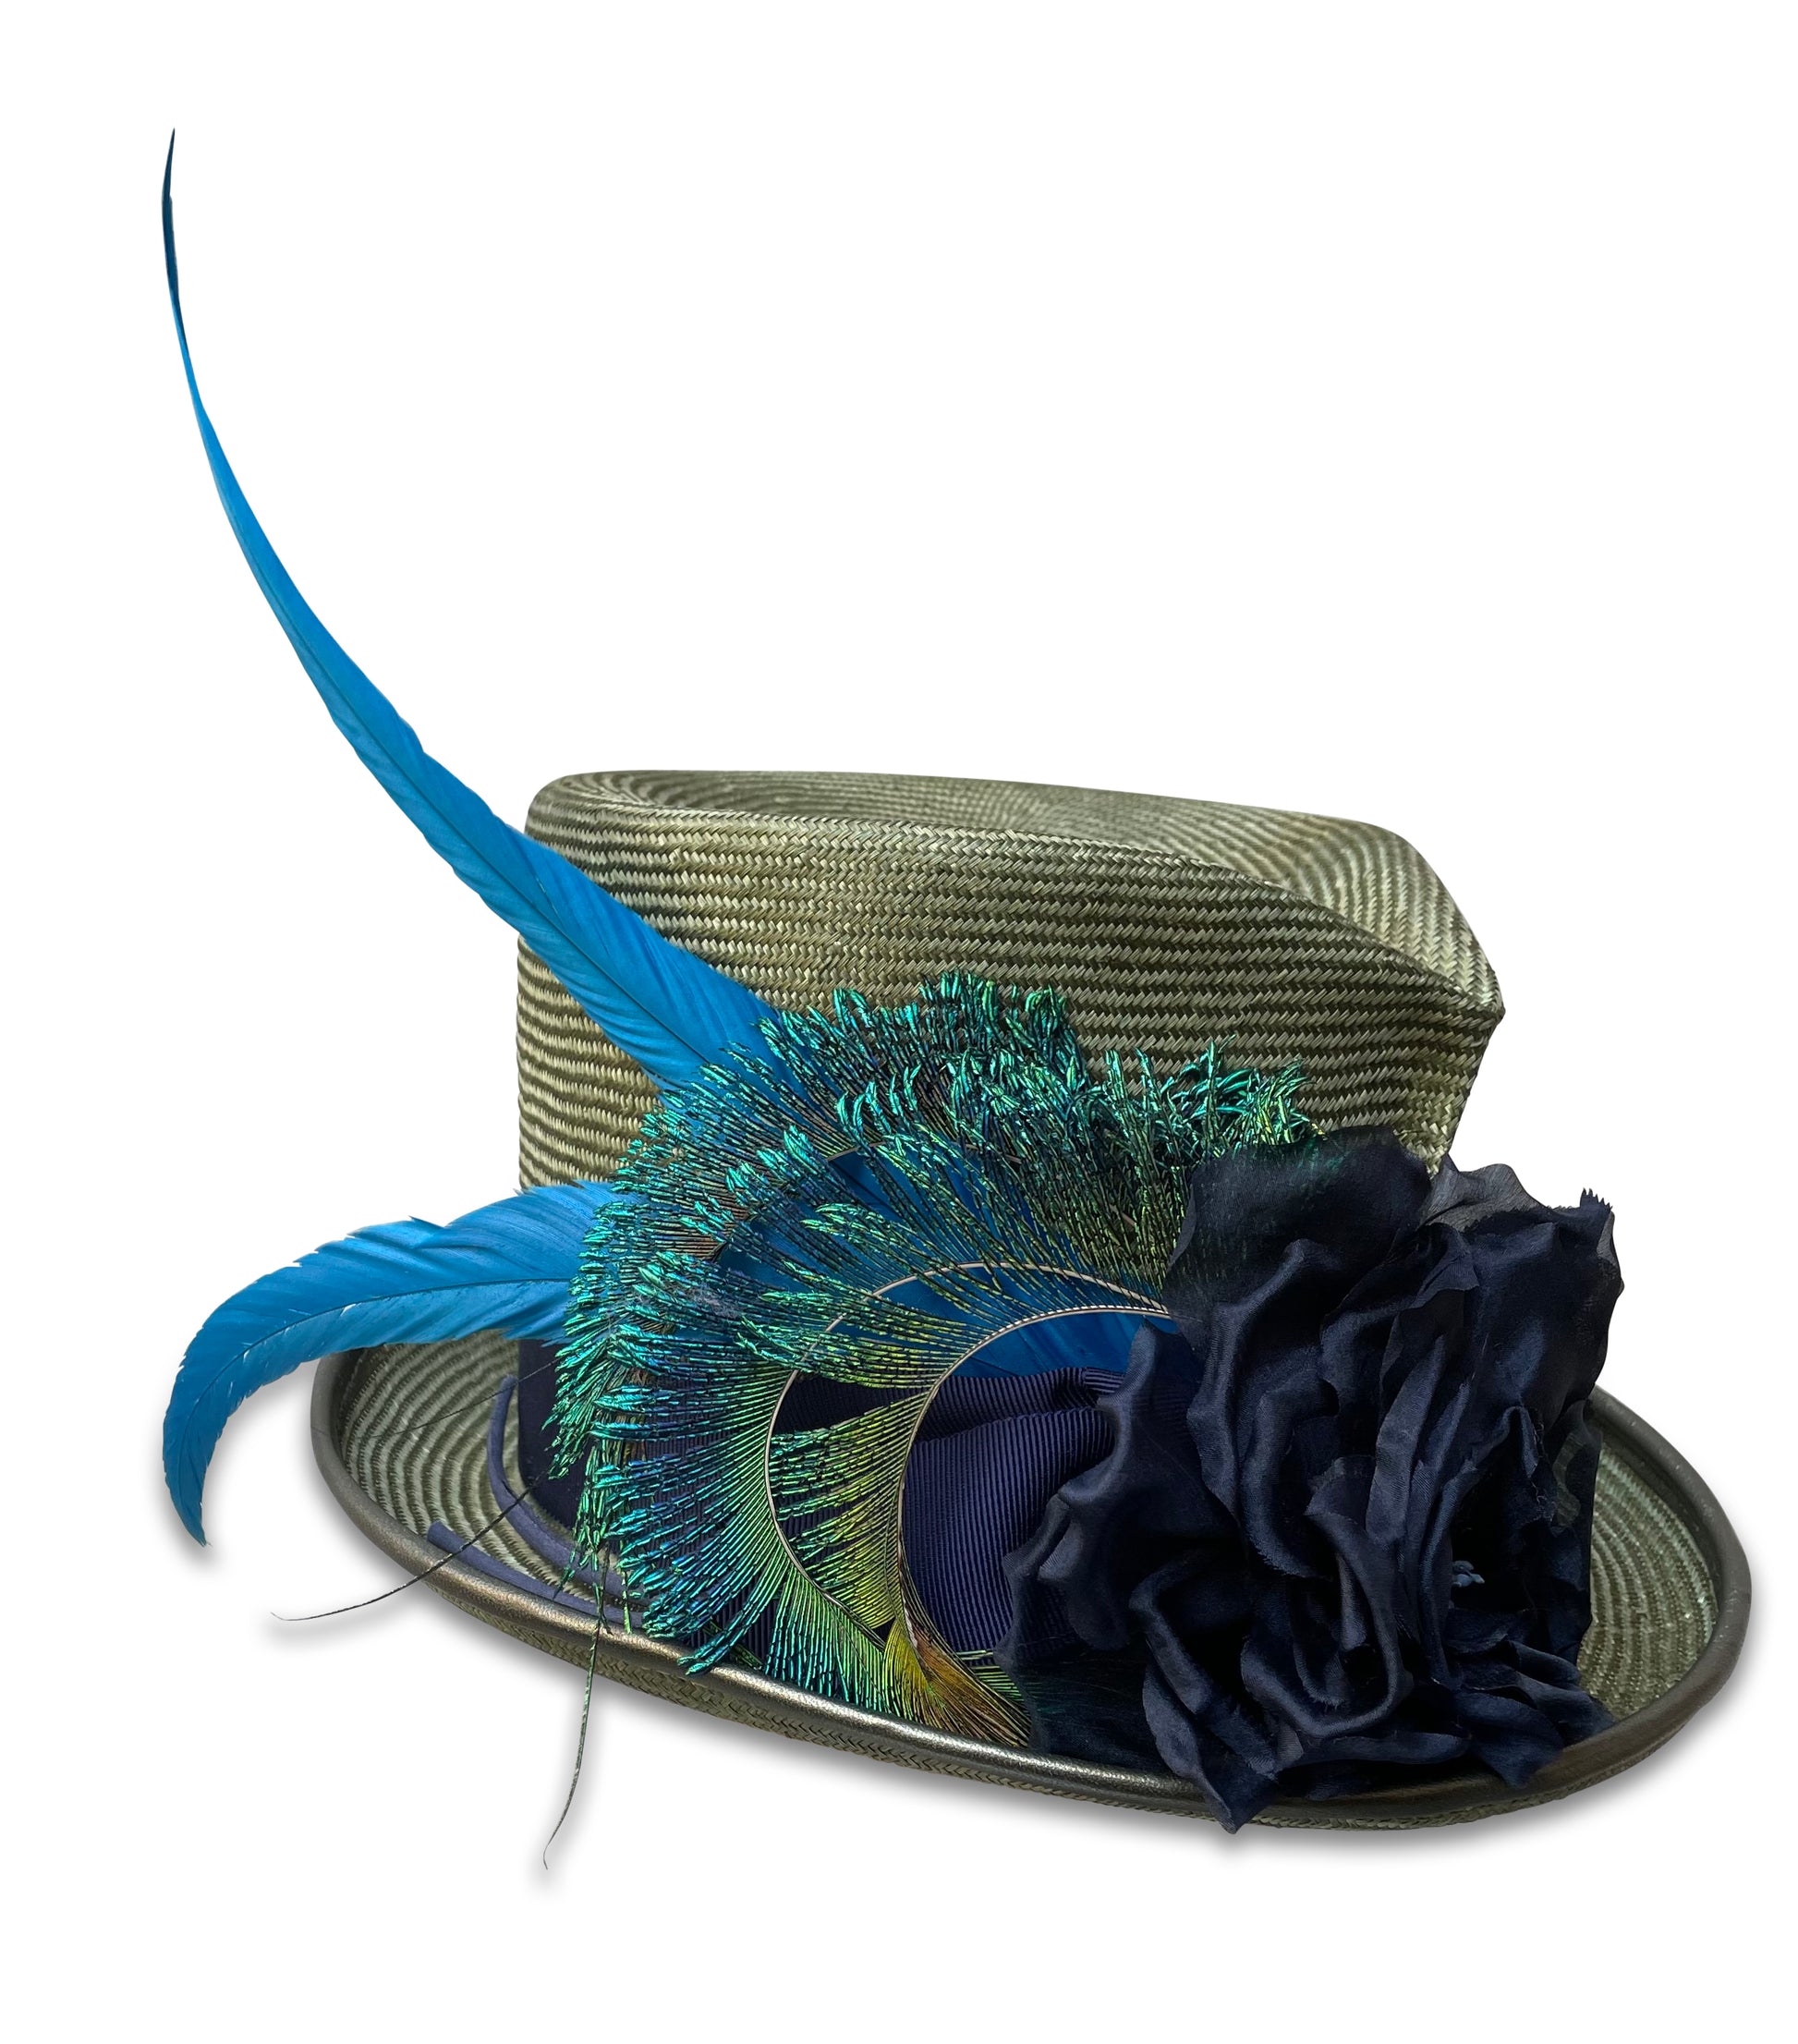 Little Derby Devil Green Straw Top Hat from Cha Cha's House of Ill Repute in New York City